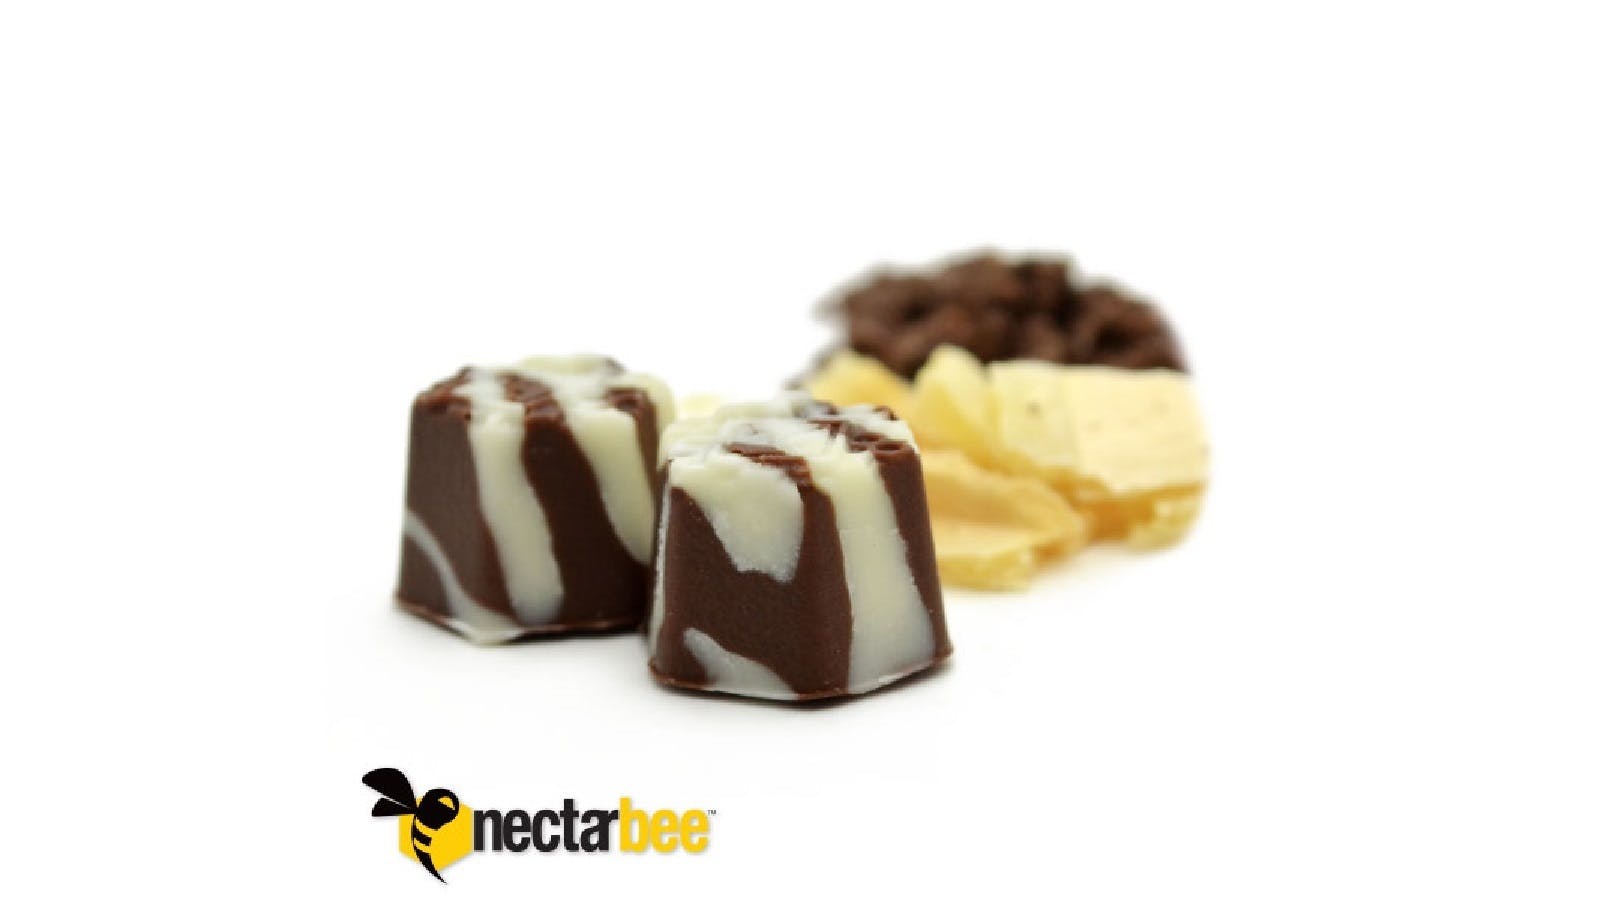 edible-nectarbee-classic-marble-80mg